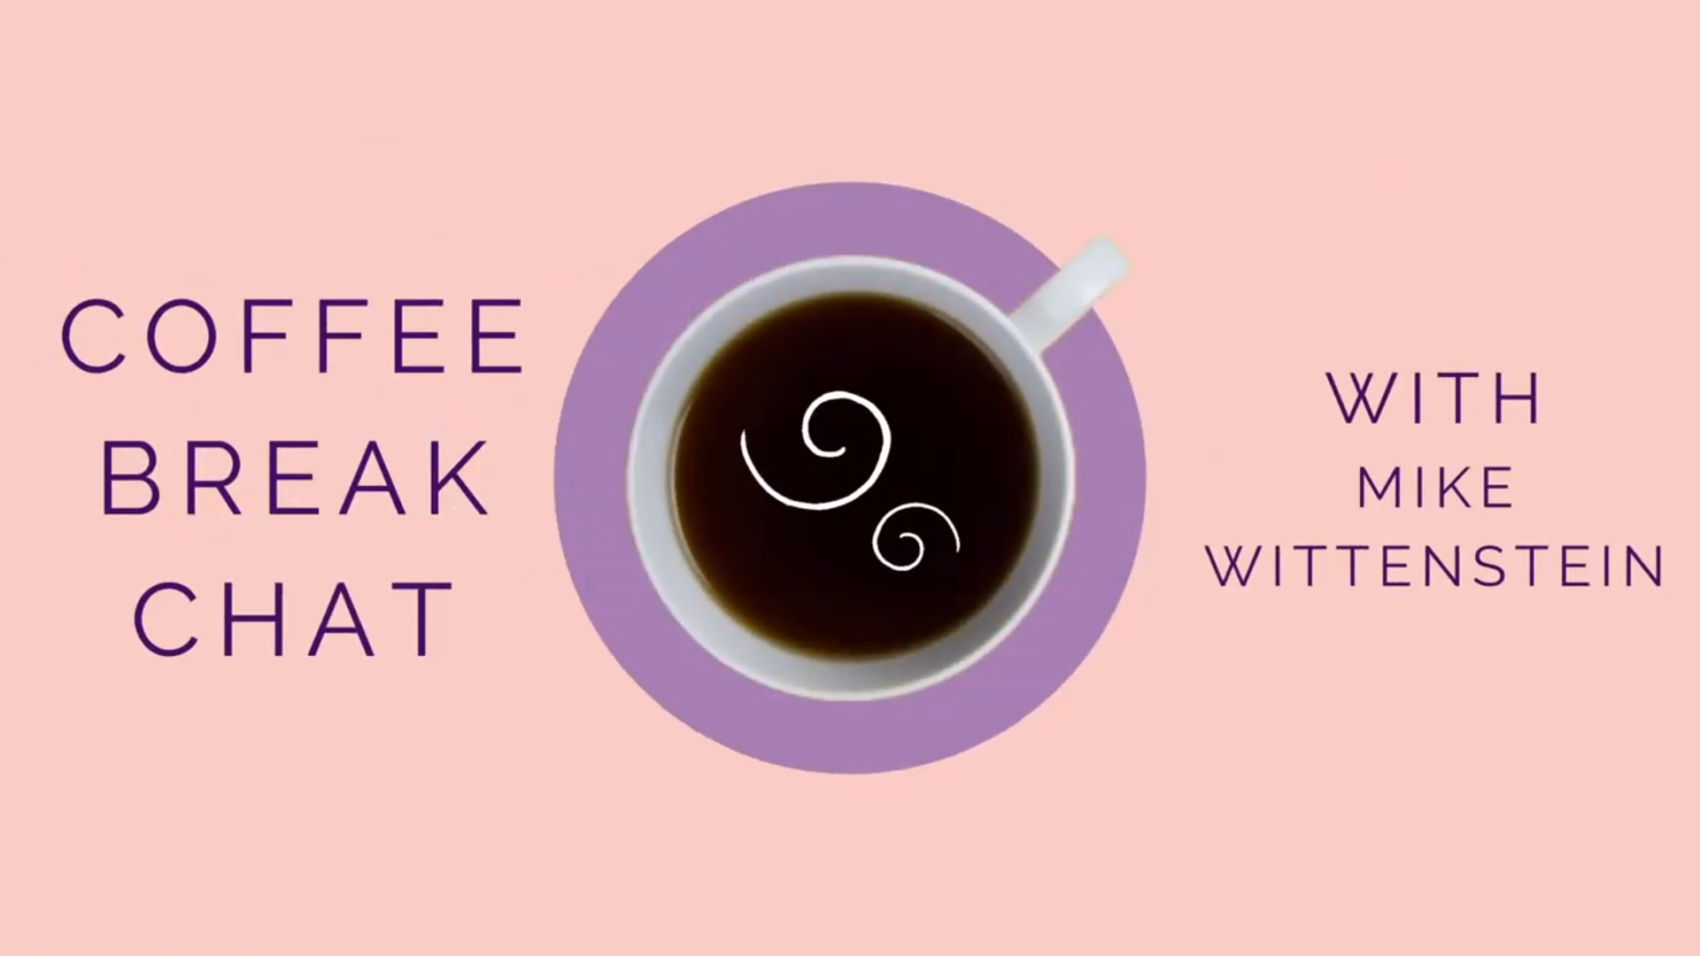 Coffee Break Chat with Mike Wittenstein